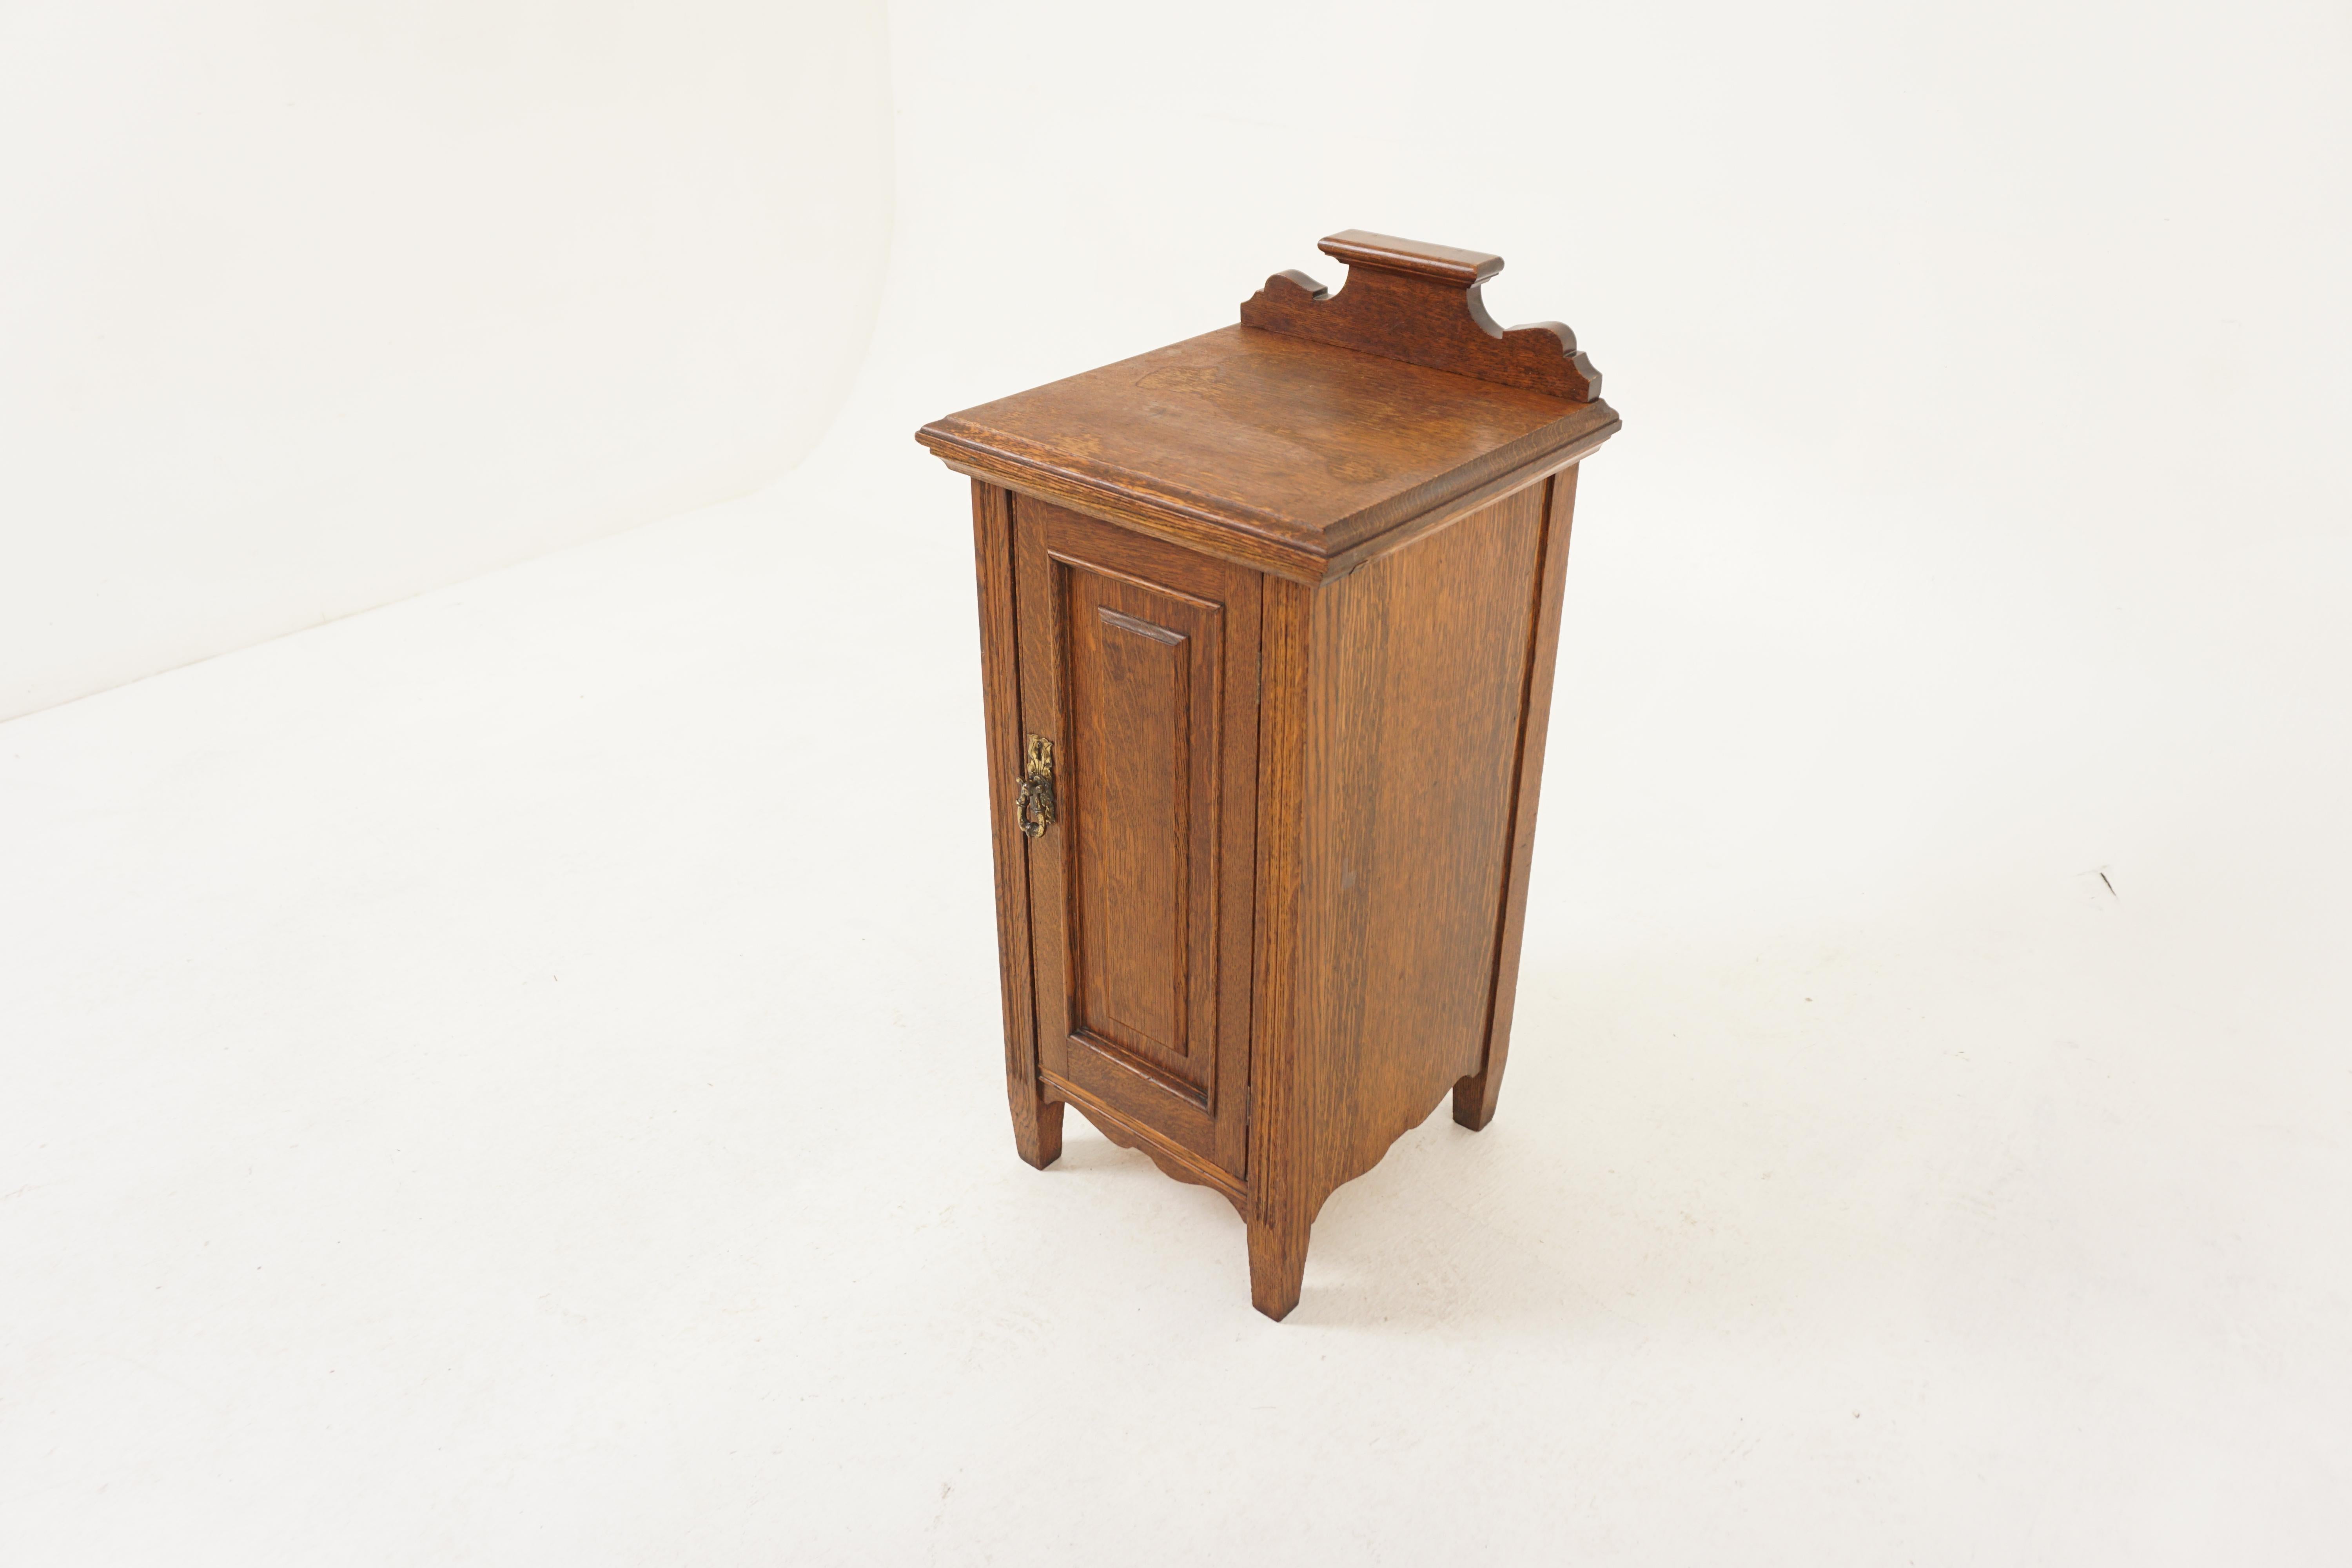 Arts & Crafts Tiger Oak Nightstand, Bedside, Lamp Table, Scotland 1900, H1187

Scotland 1900
Solid Oak
Original finish
Carved pediment on top
Panelled door with original brass pull
Opens to reveal single shelf (not original)
Raised on tapering